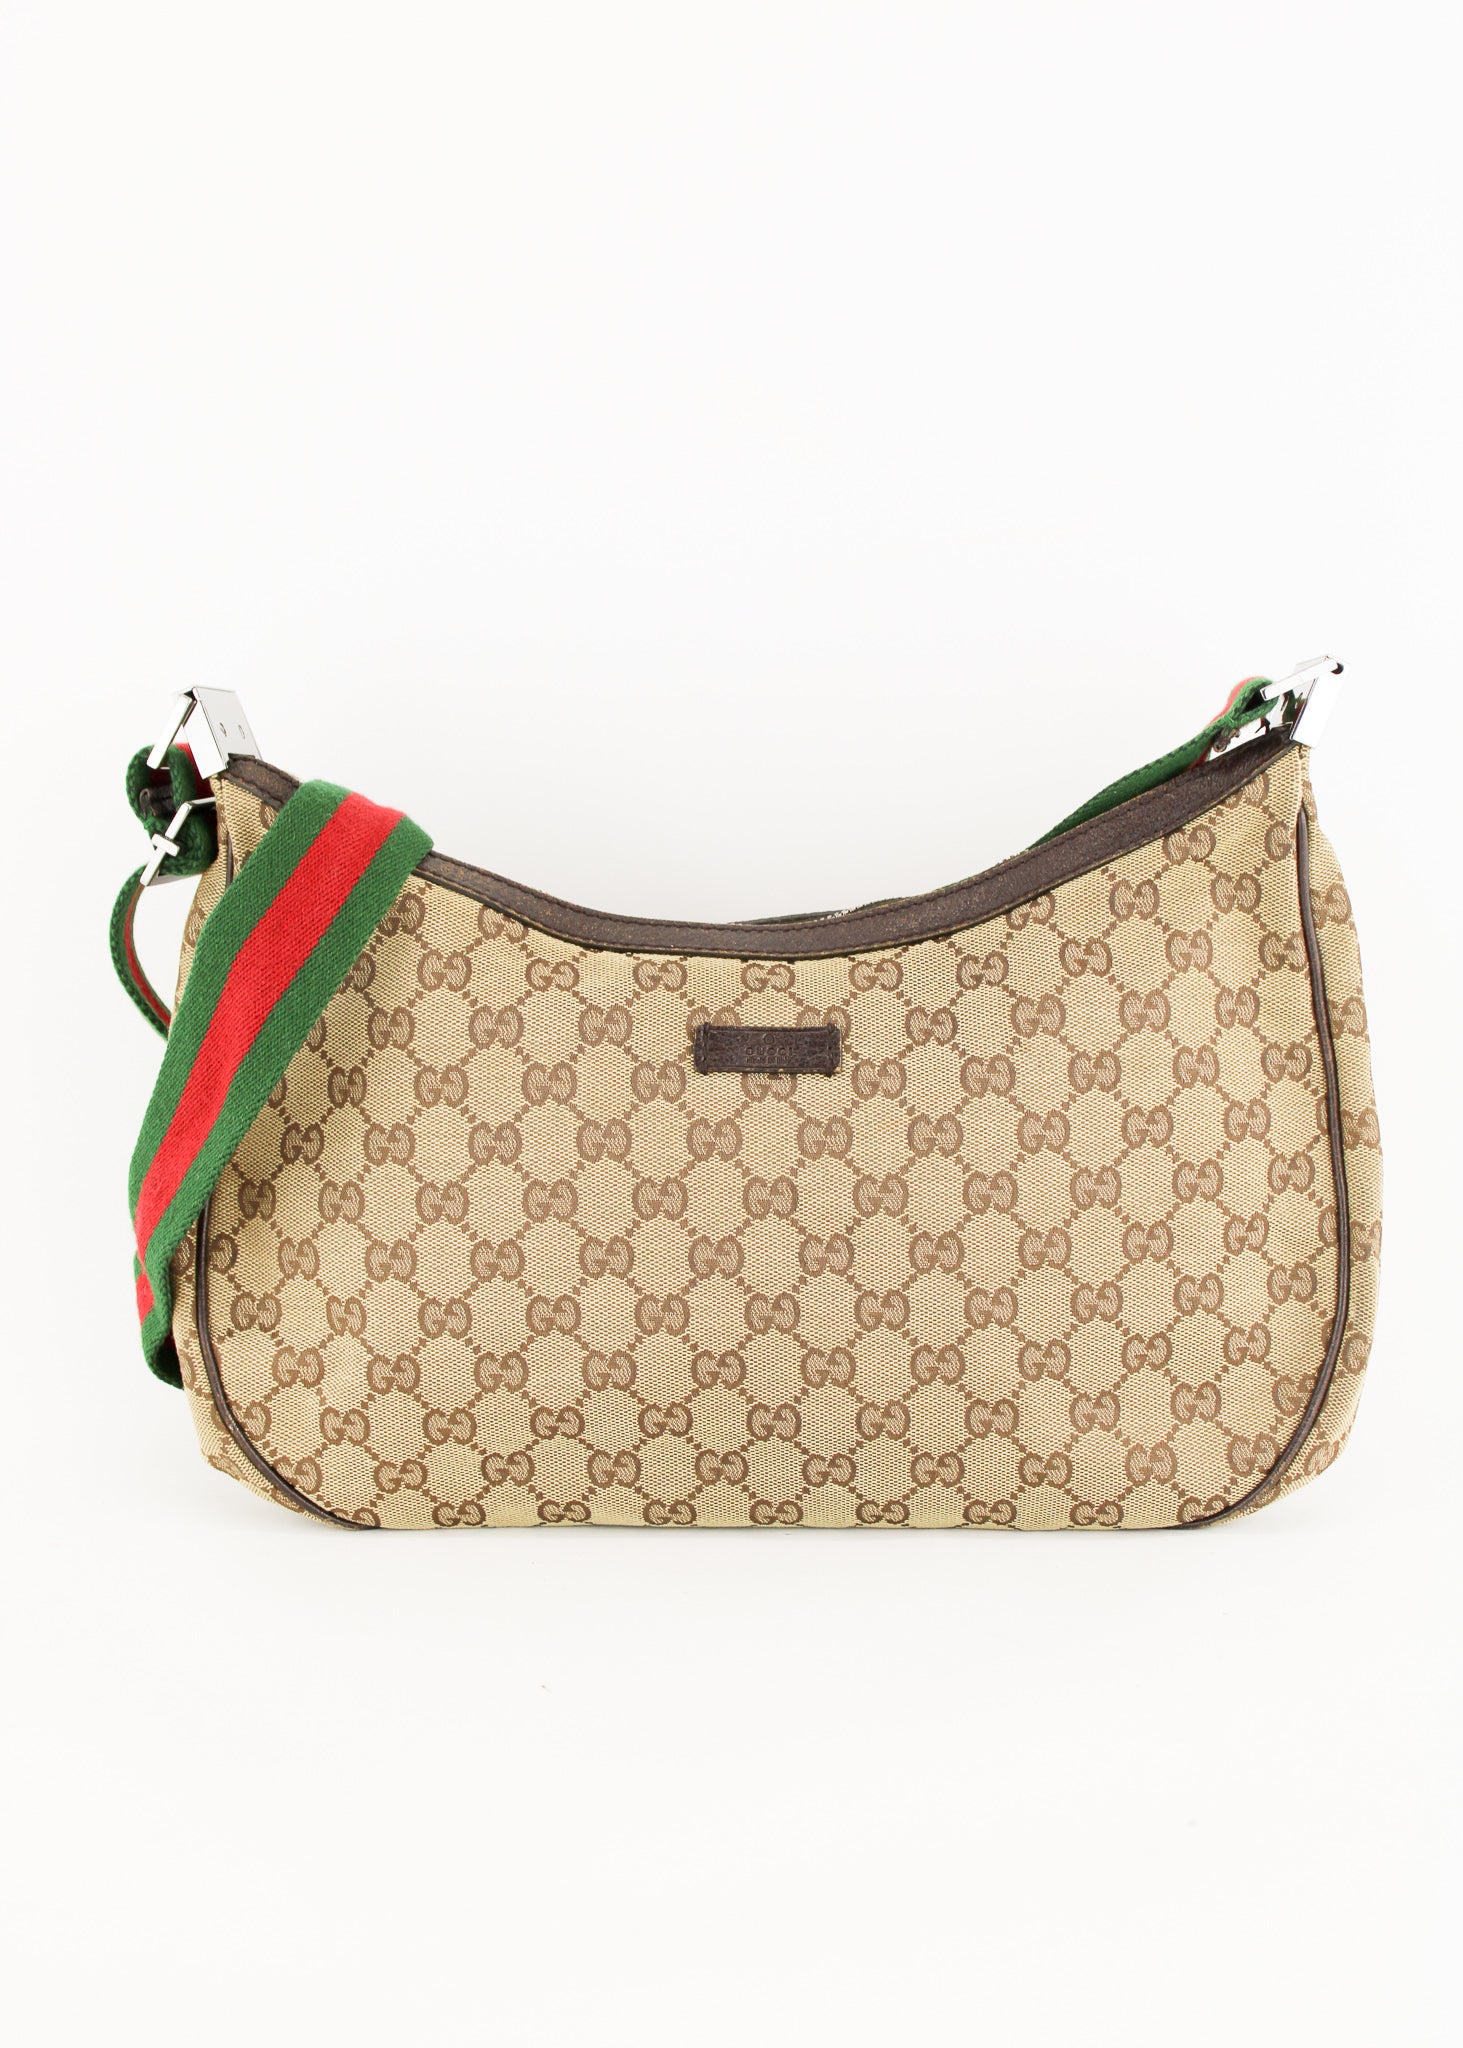 Authenticated Used Gucci Shoulder Bag Black 122790 Canvas Leather